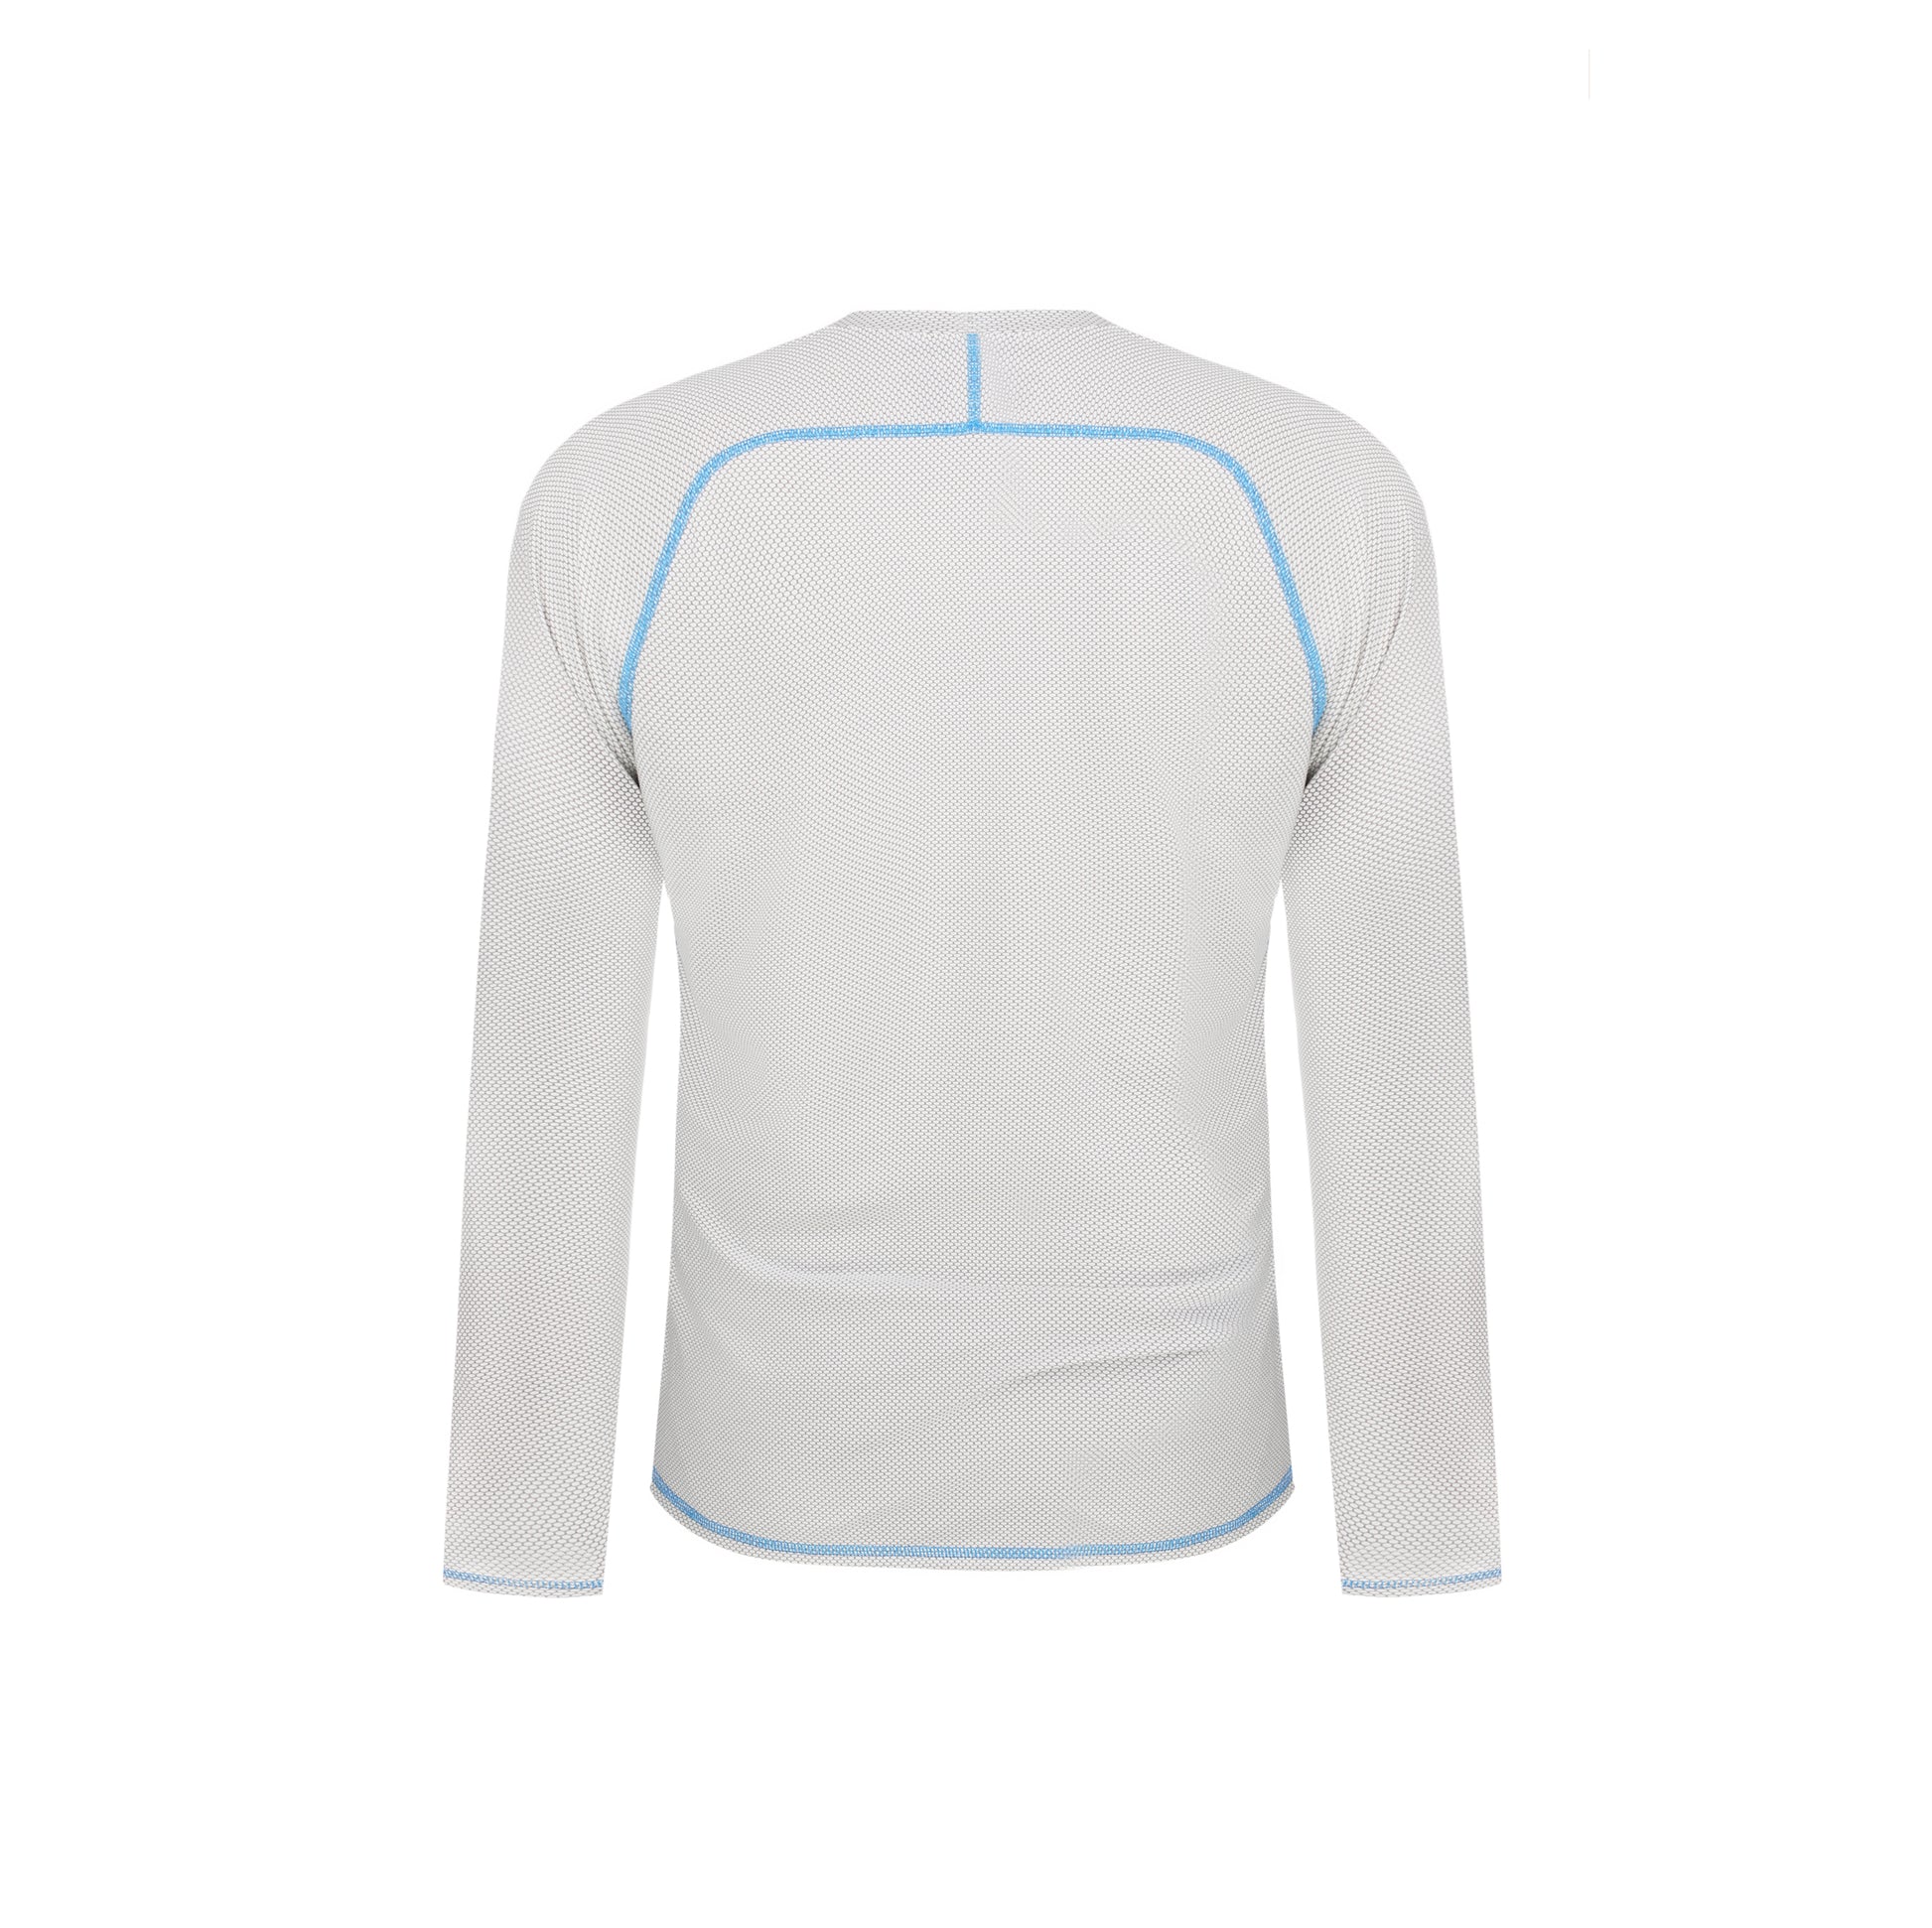 Zipperless casual white cooling shirts from REwind